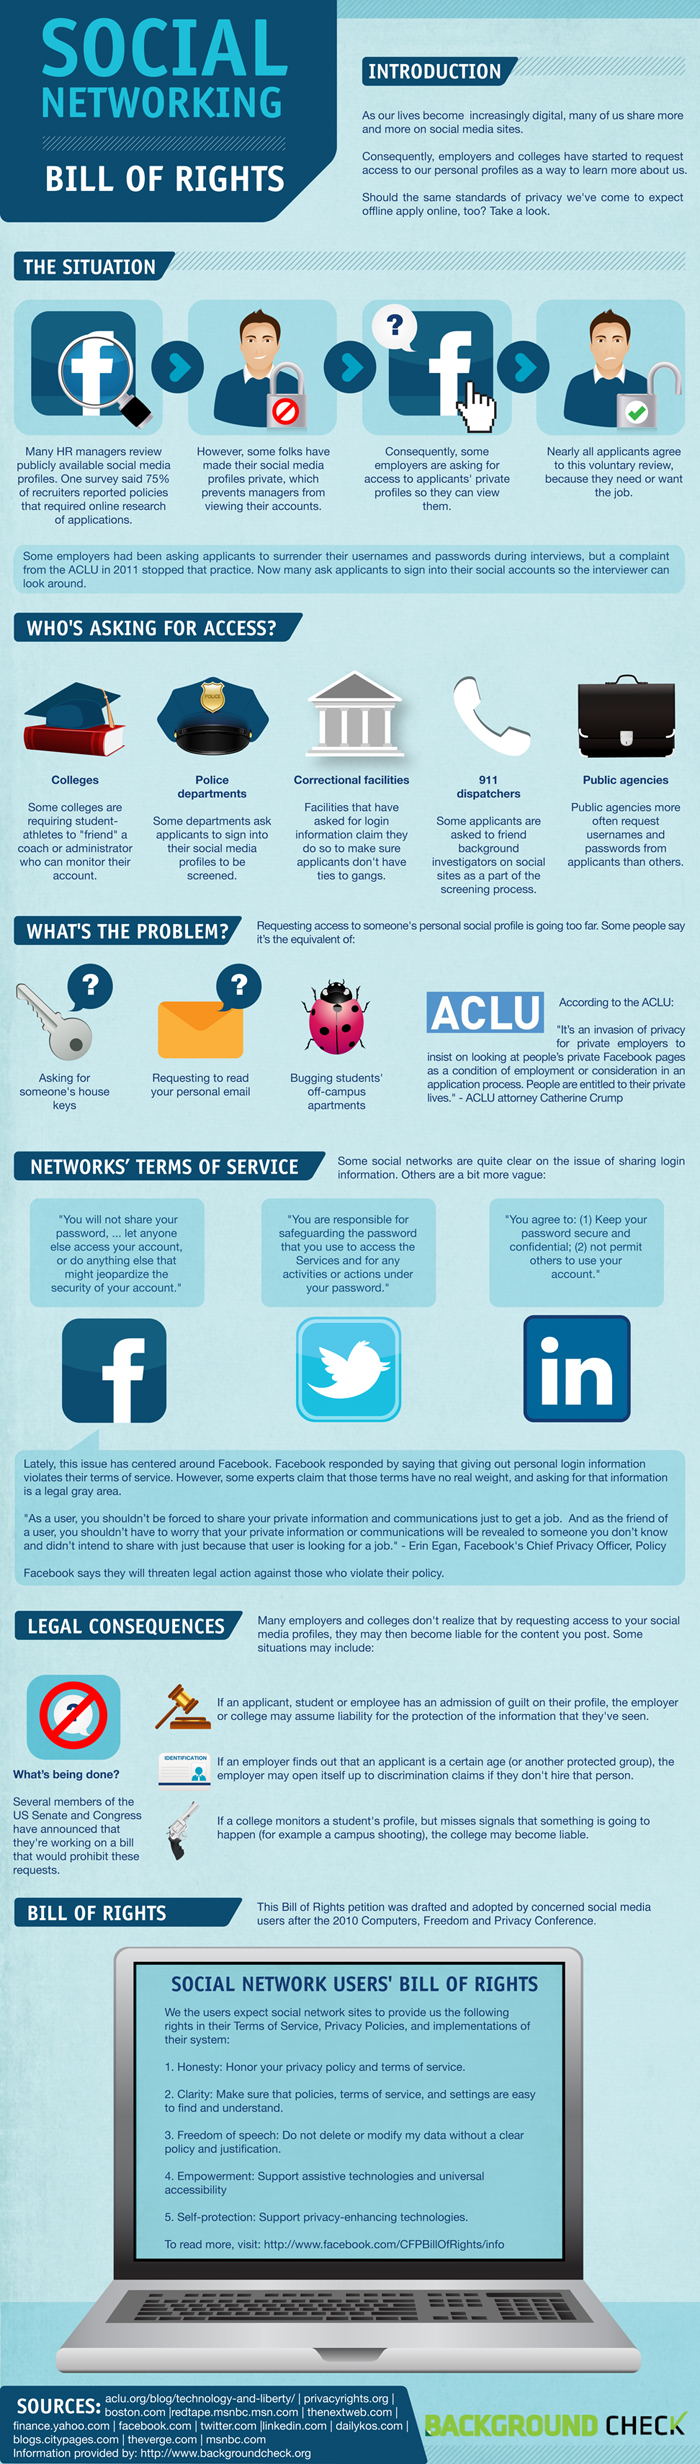 Social Networking: Bill of Rights [infographic]